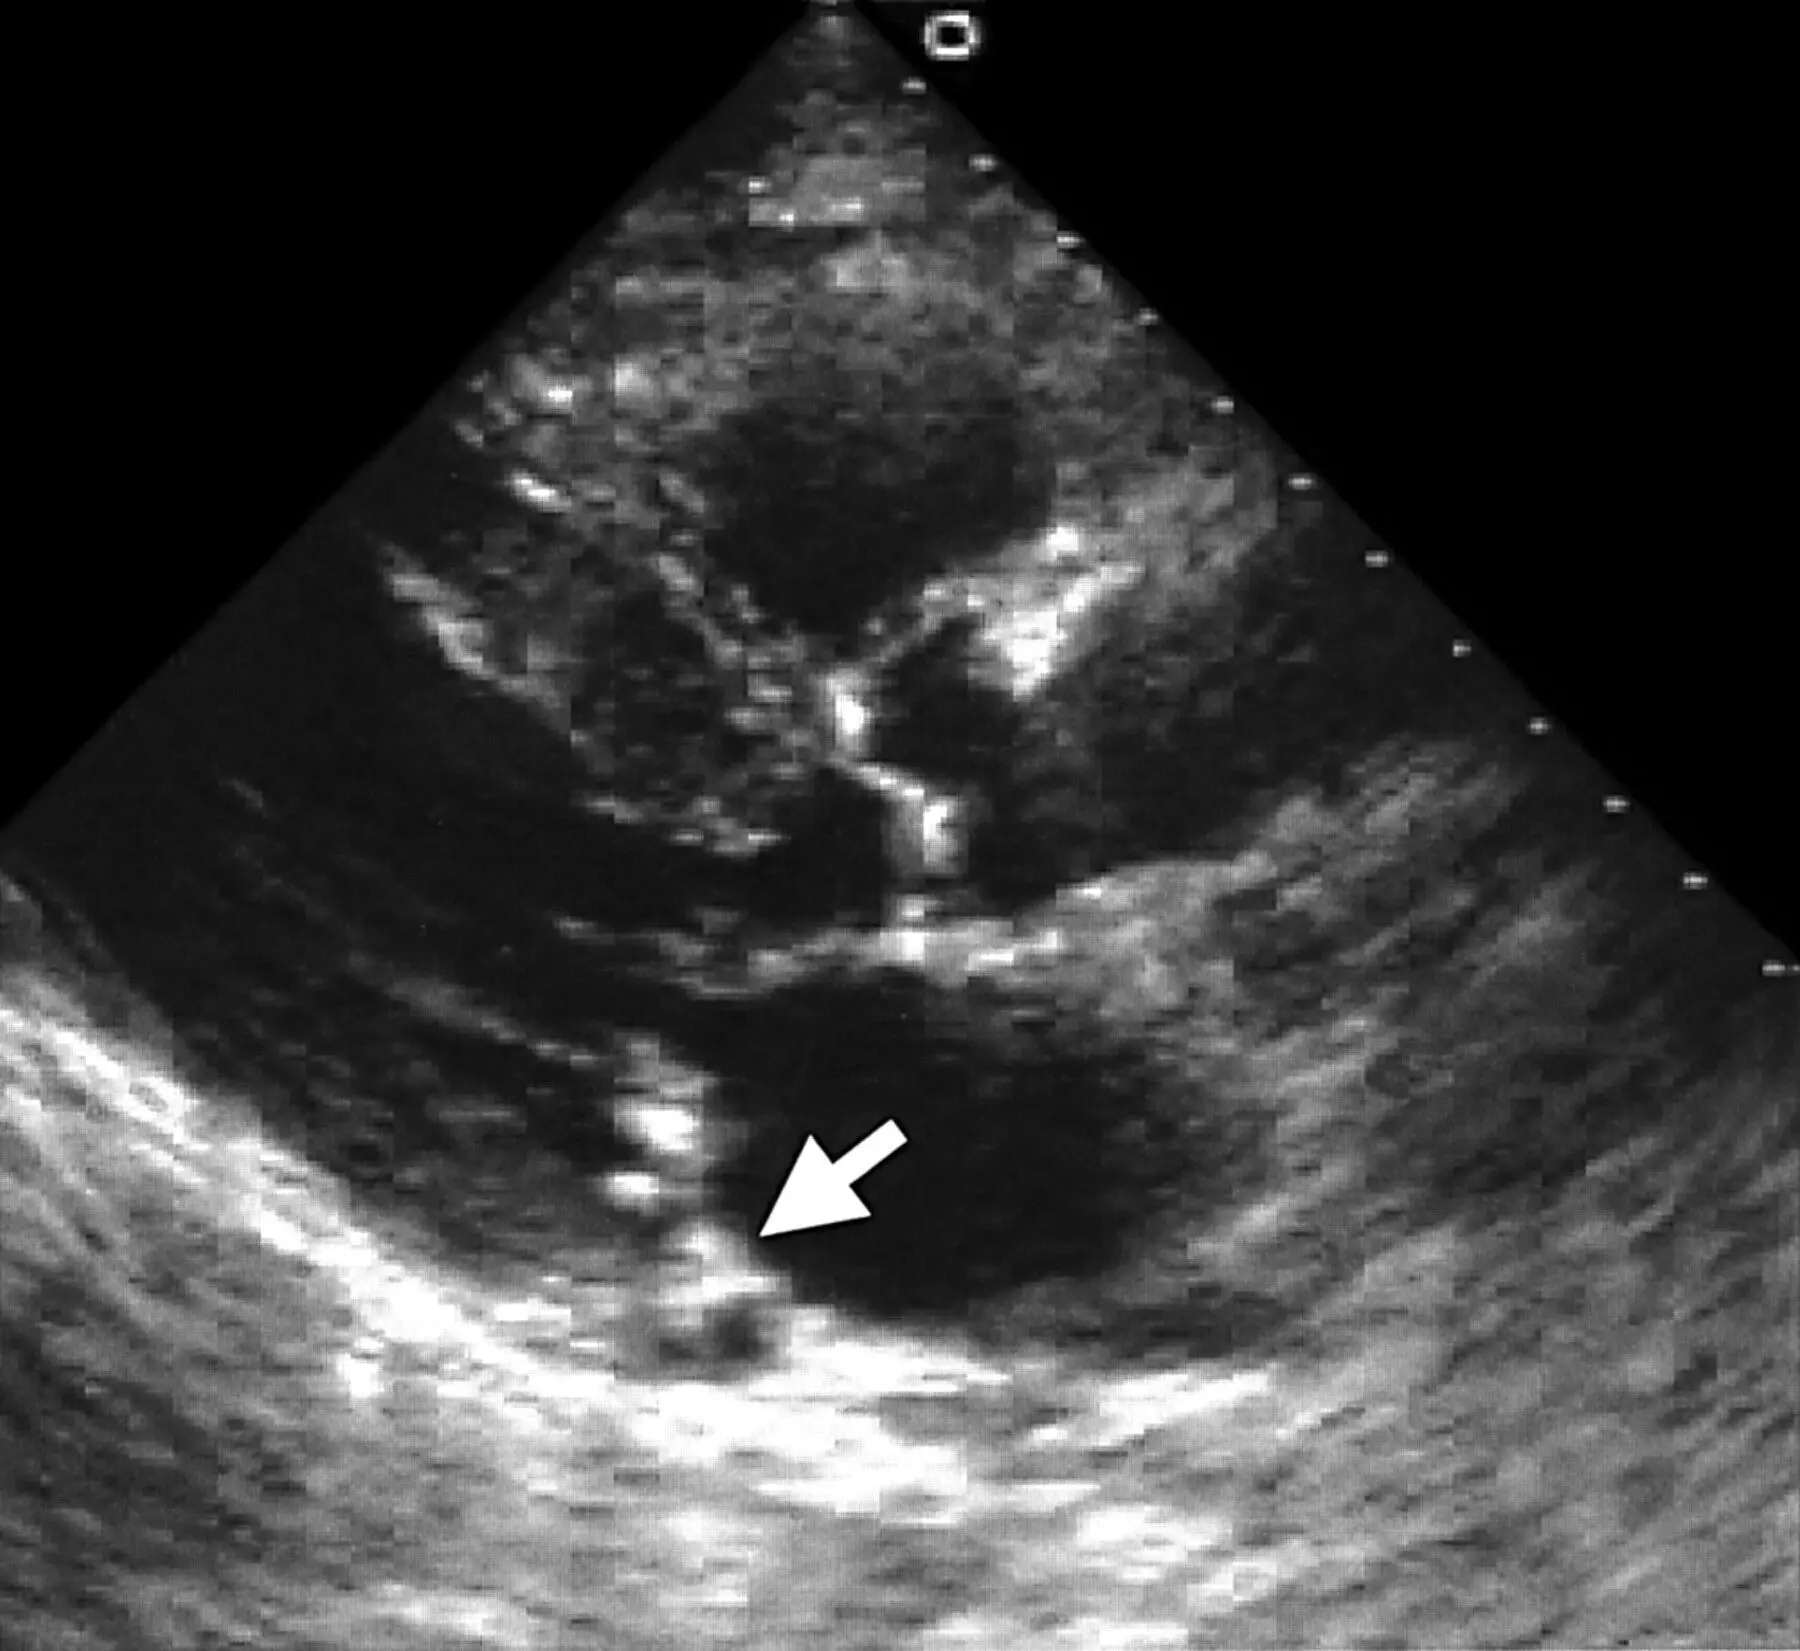 Necrotic Mitral Annular Calcification a potential source of embolism: Case report